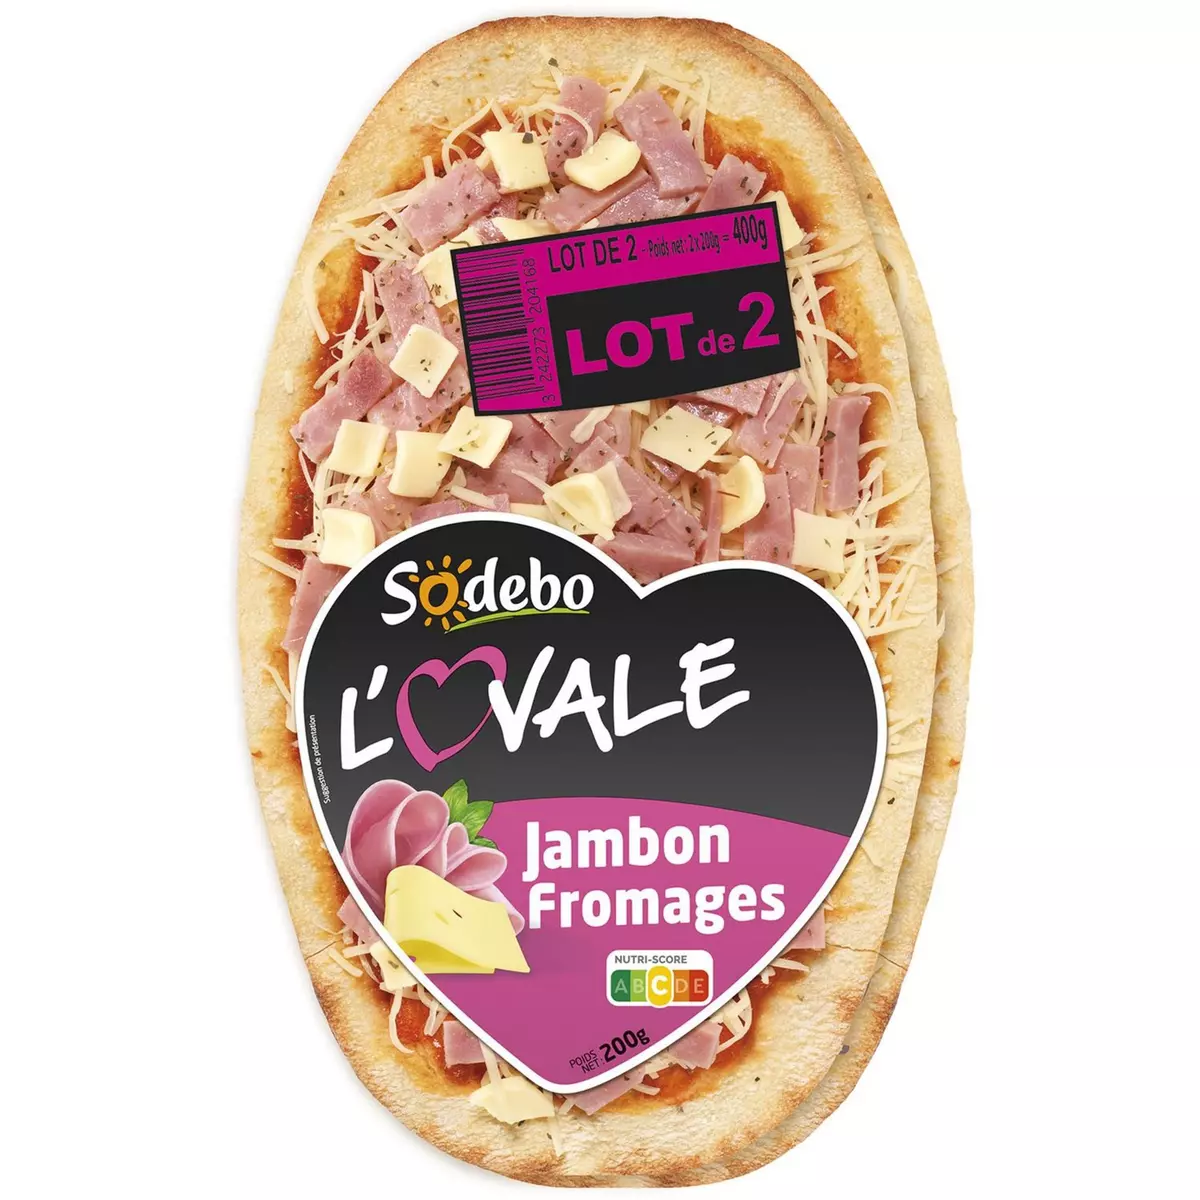 SODEBO L'Ovale Pizza jambon fromage  2x200g